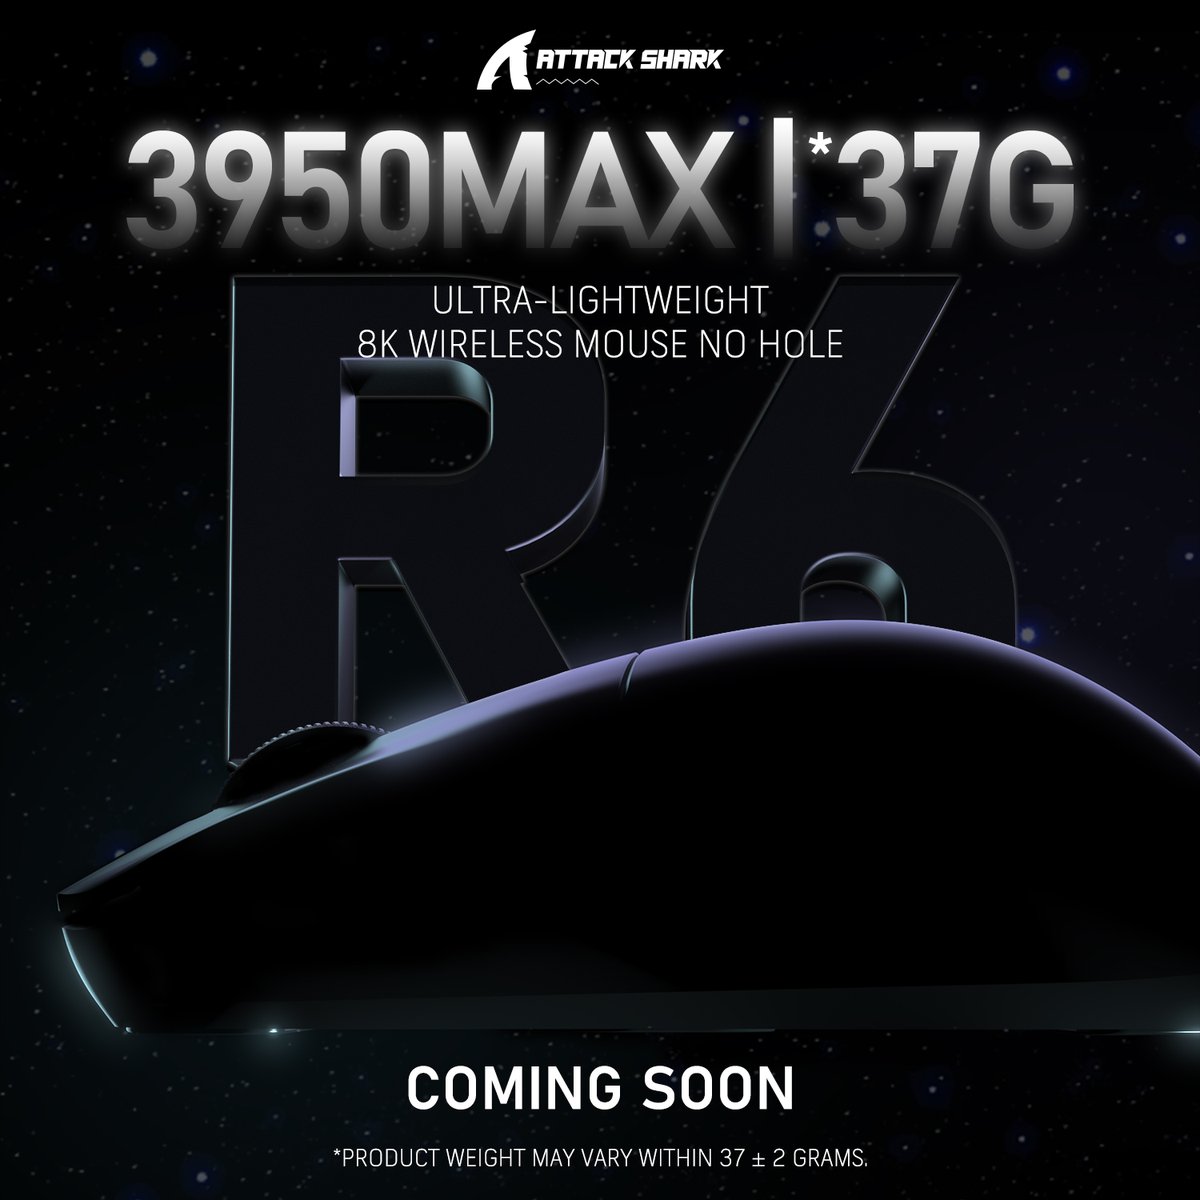 Hey,guys! 
ATTACK SHARK R6 Mouse is coming soon.

🔝MEET AT THE TOP.

✔️Pixart Sensor: PAW 3950 MAX

🖱️37g Superlight Design

 8⃣ 8K Polling Rate

❤️Stay tuned! Explore the possibilities of more extreme performance with us!

#attackshark #3950max